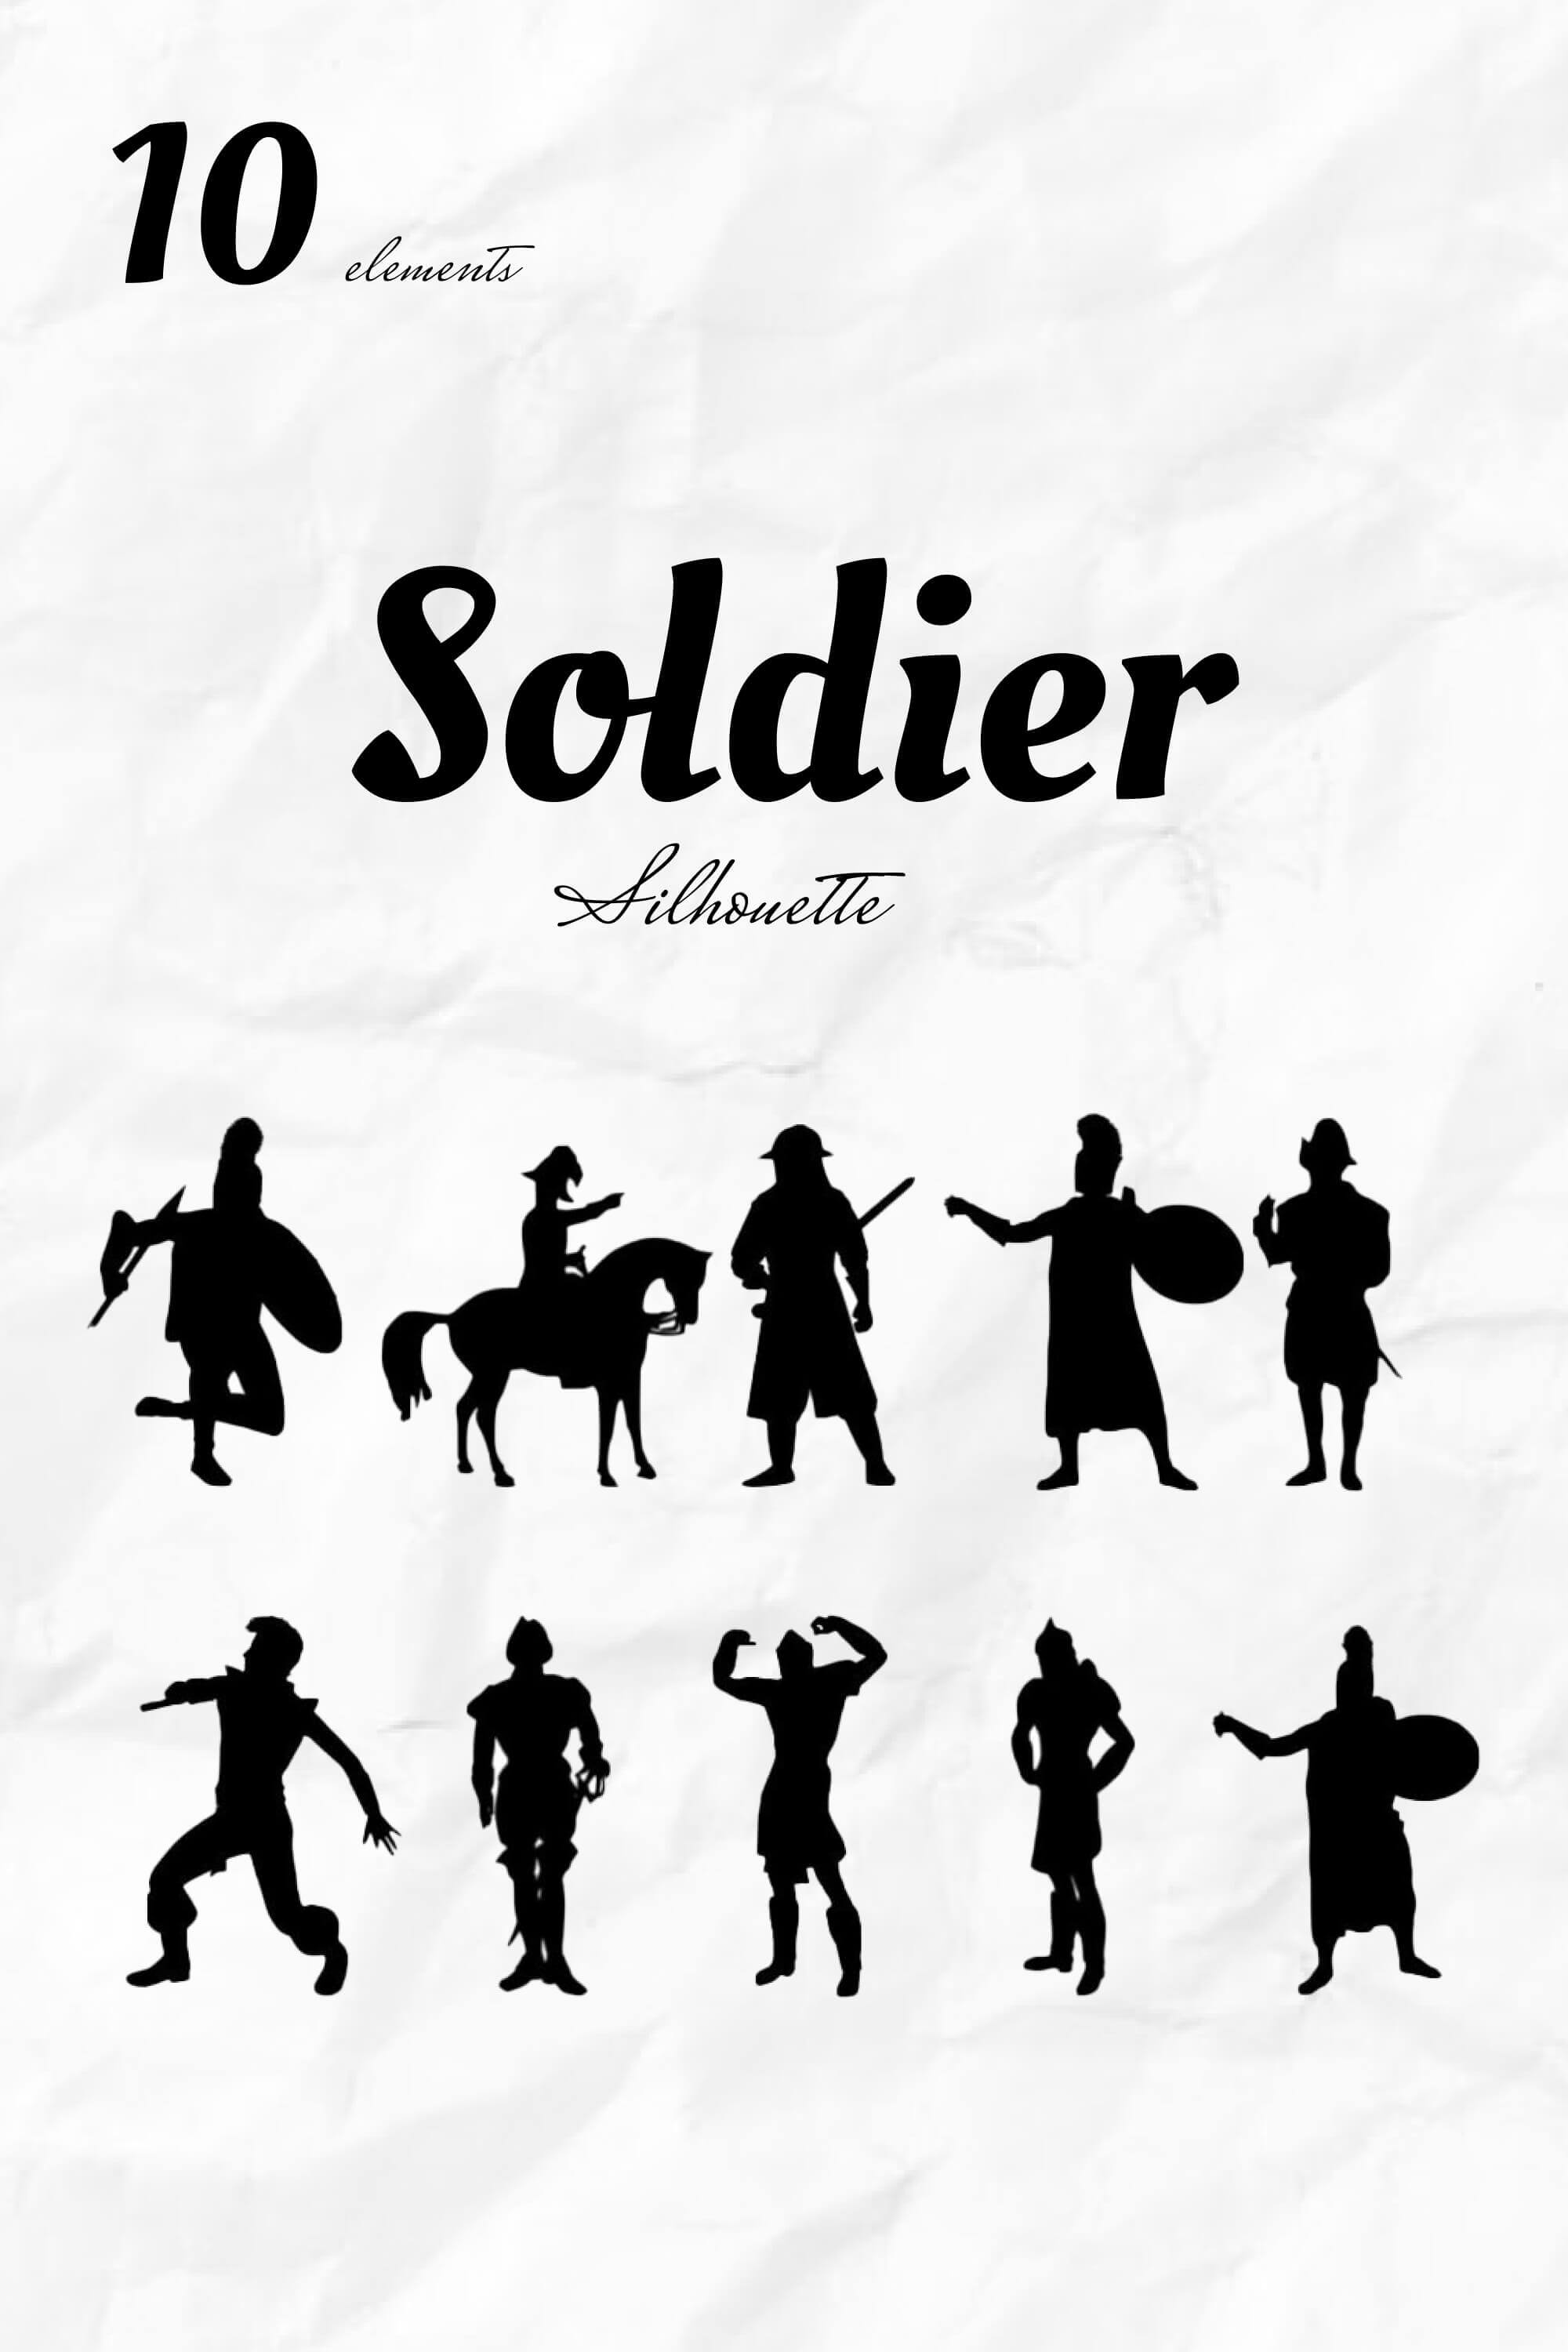 Silhouettes of soldiers of different eras.